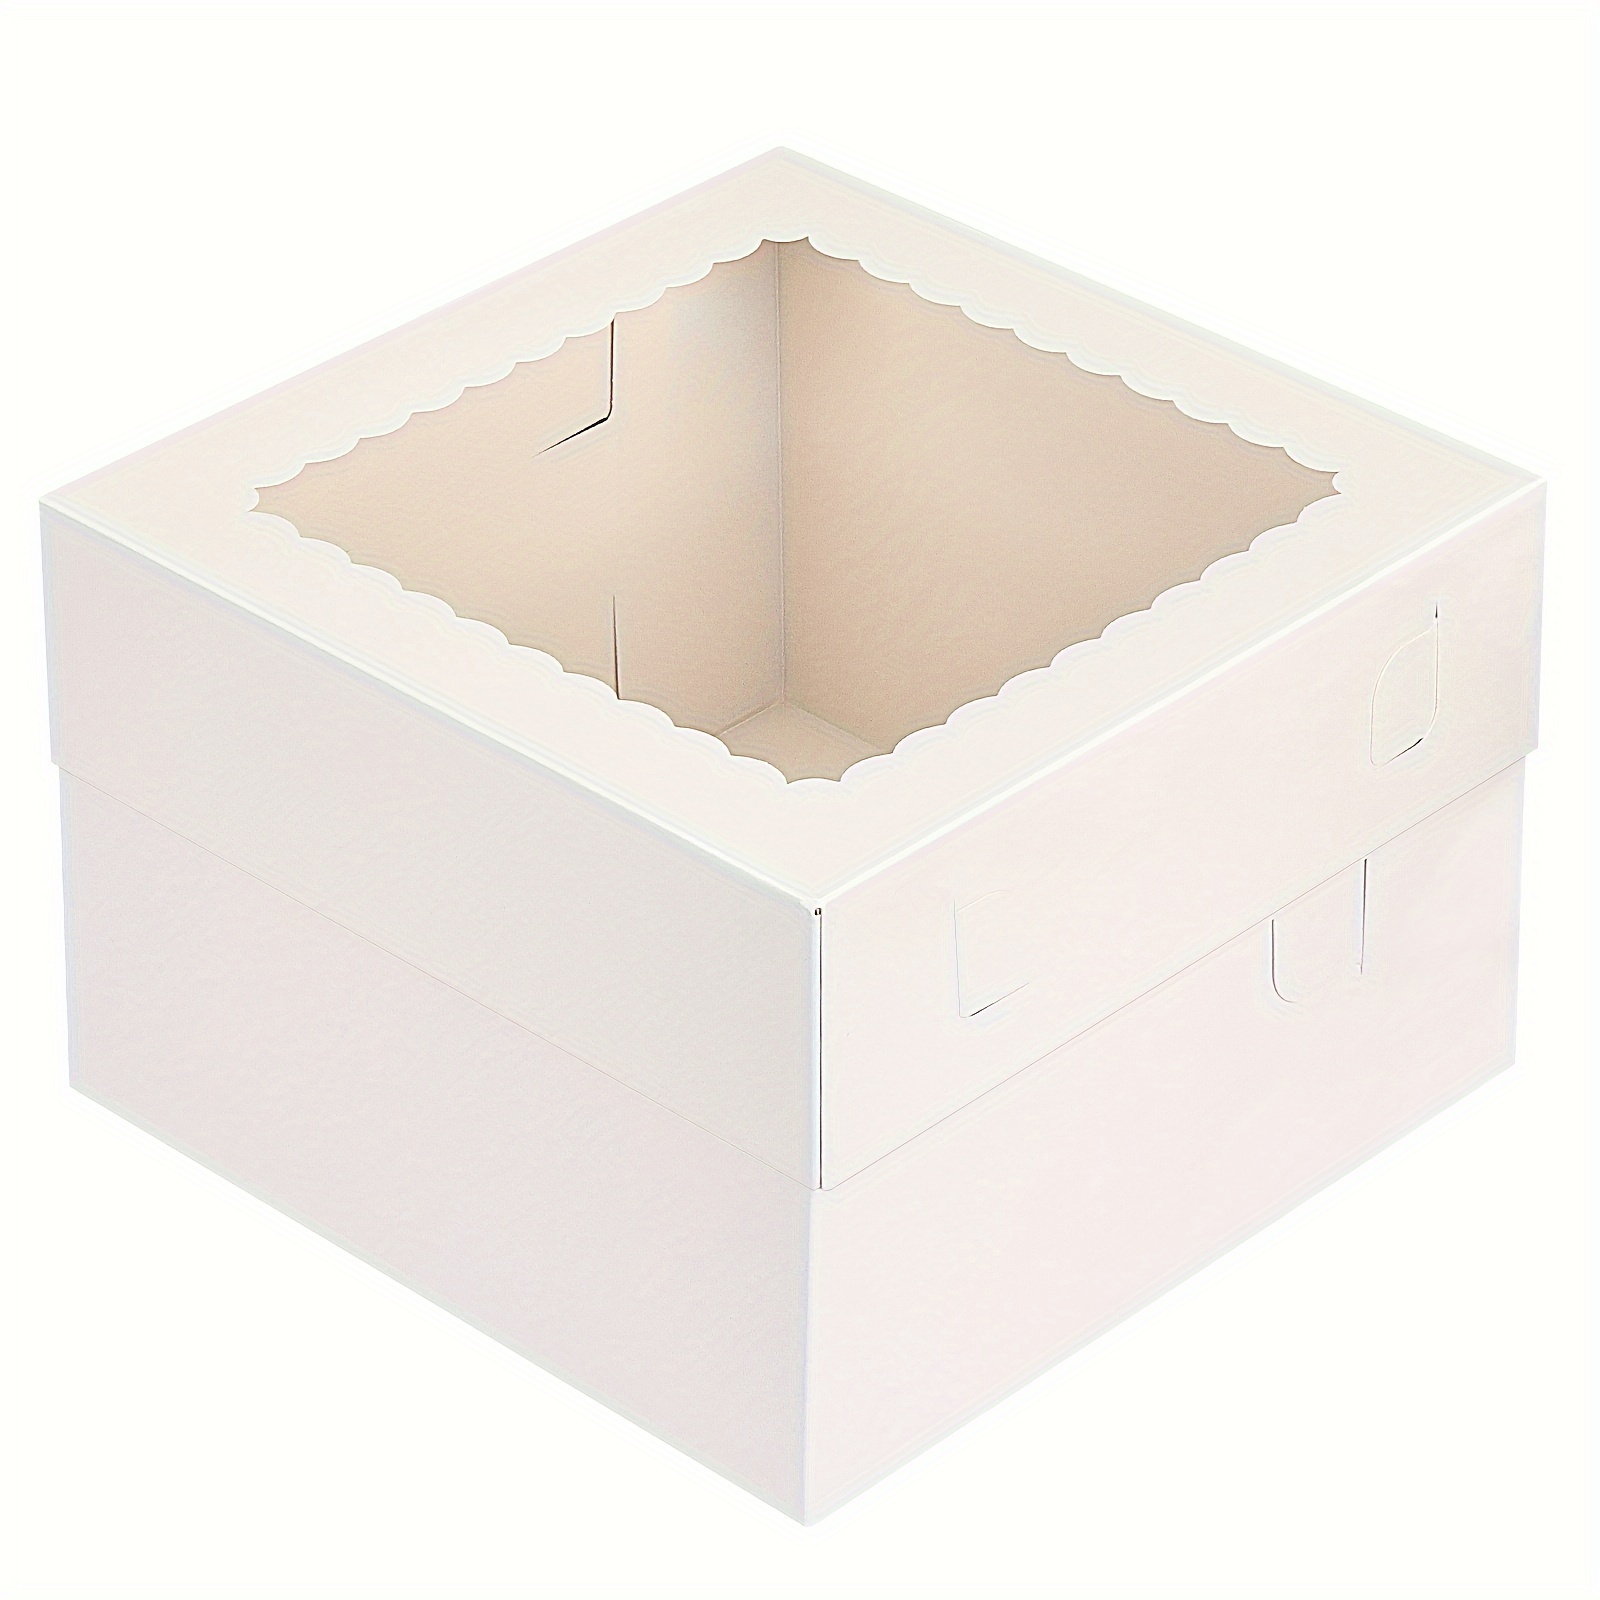 

20 Pcs Cake Boxes 12x12x8 Inch White Bread Boxes With Window Cake Containers, Tall Dessert Cardboard Boxes, Used For Weddings, Birthdays, Parties, Bridal Showers, And Holiday Celebrations